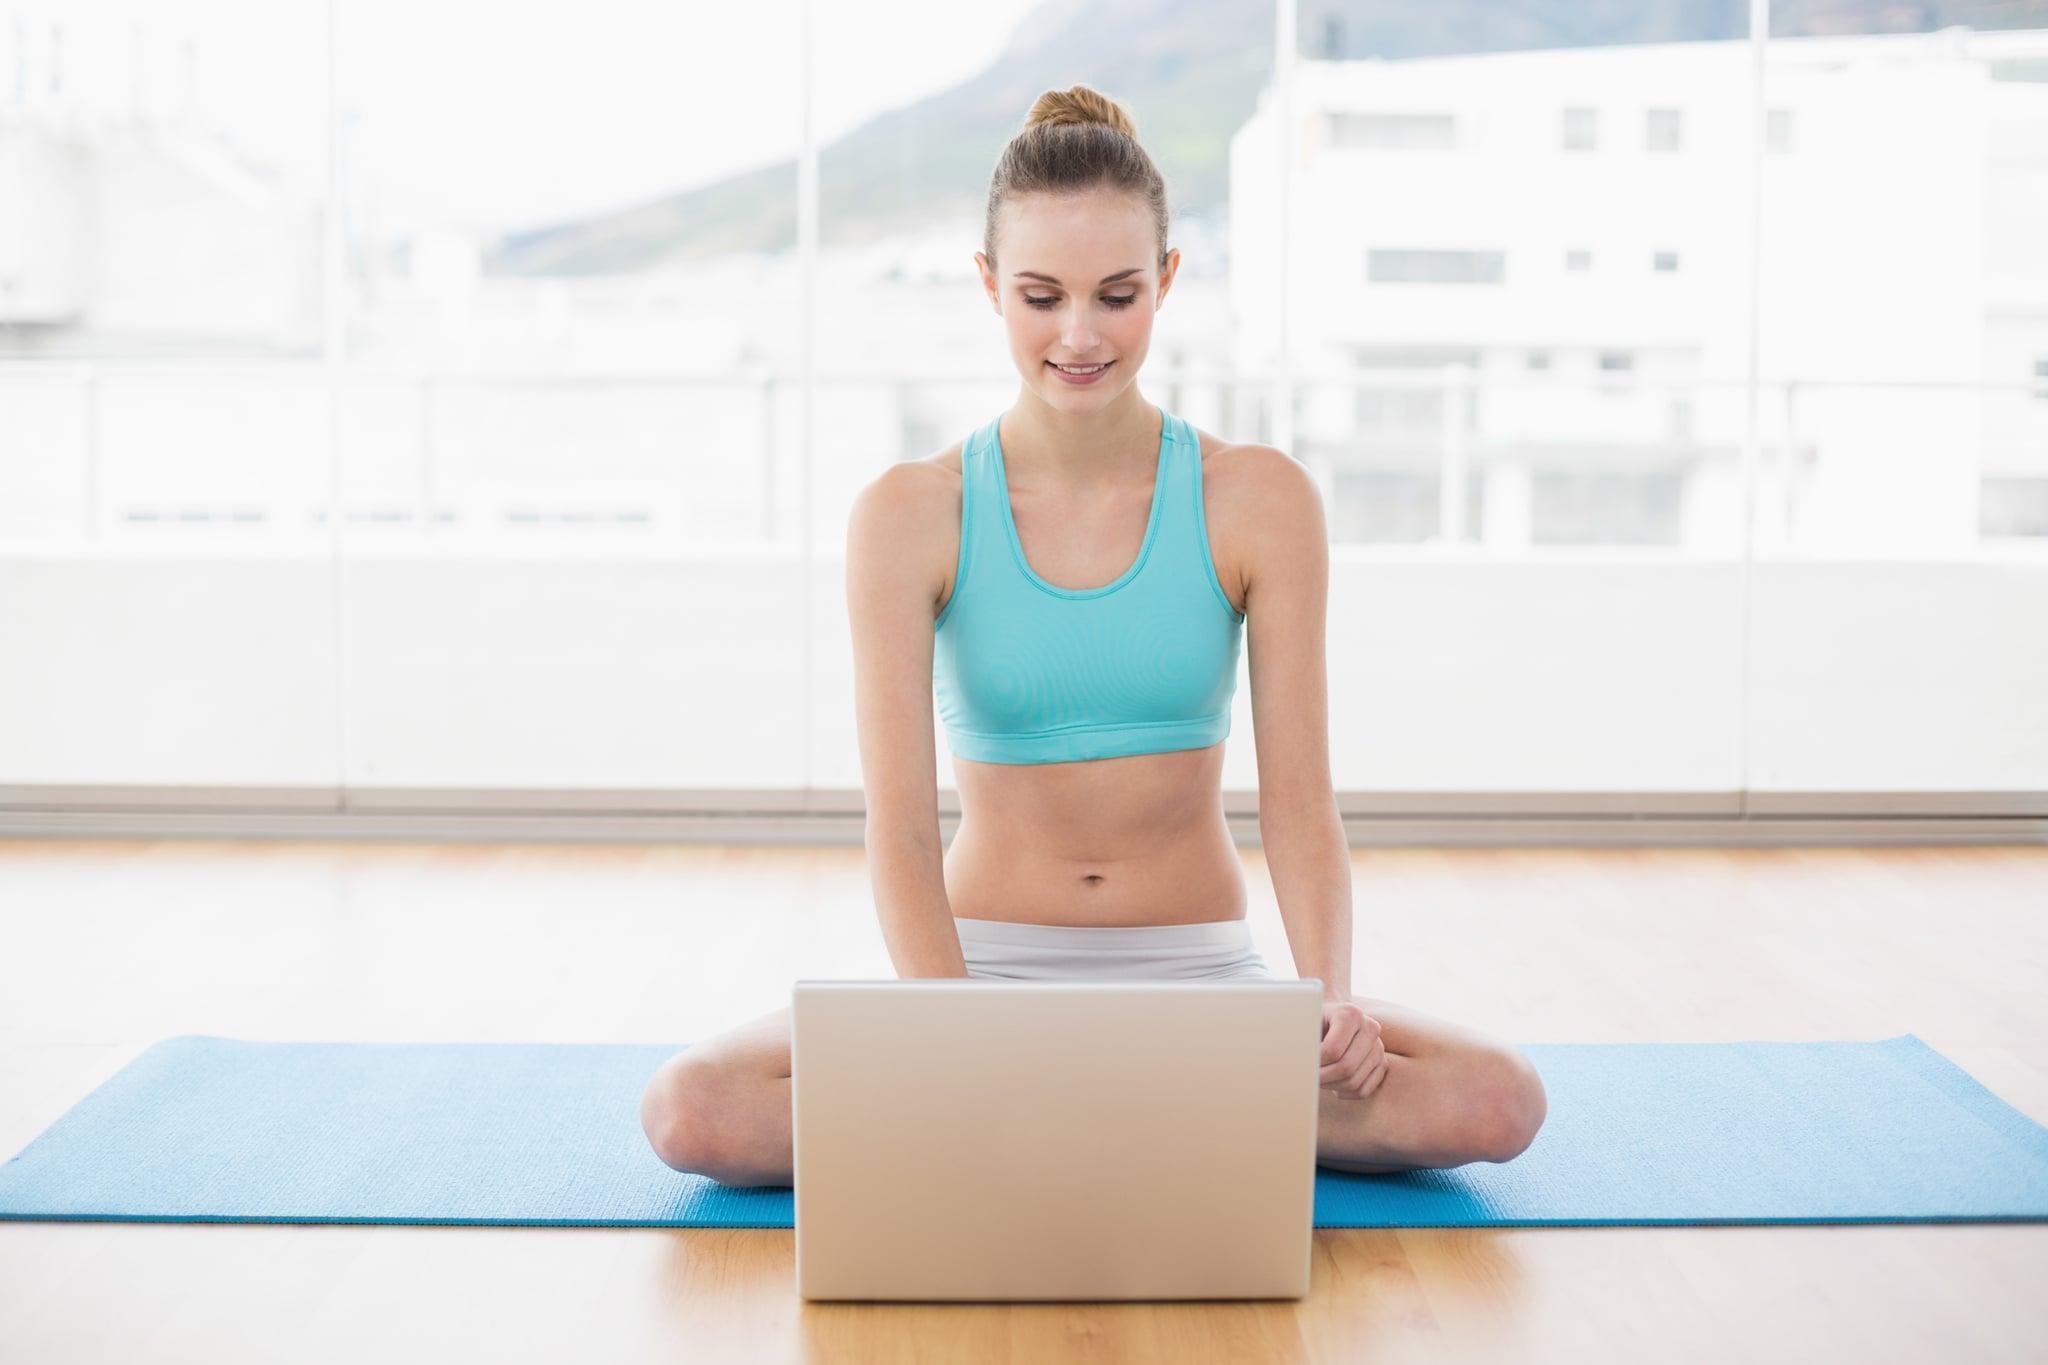 How much does it cost to get an online yoga teacher certification course?